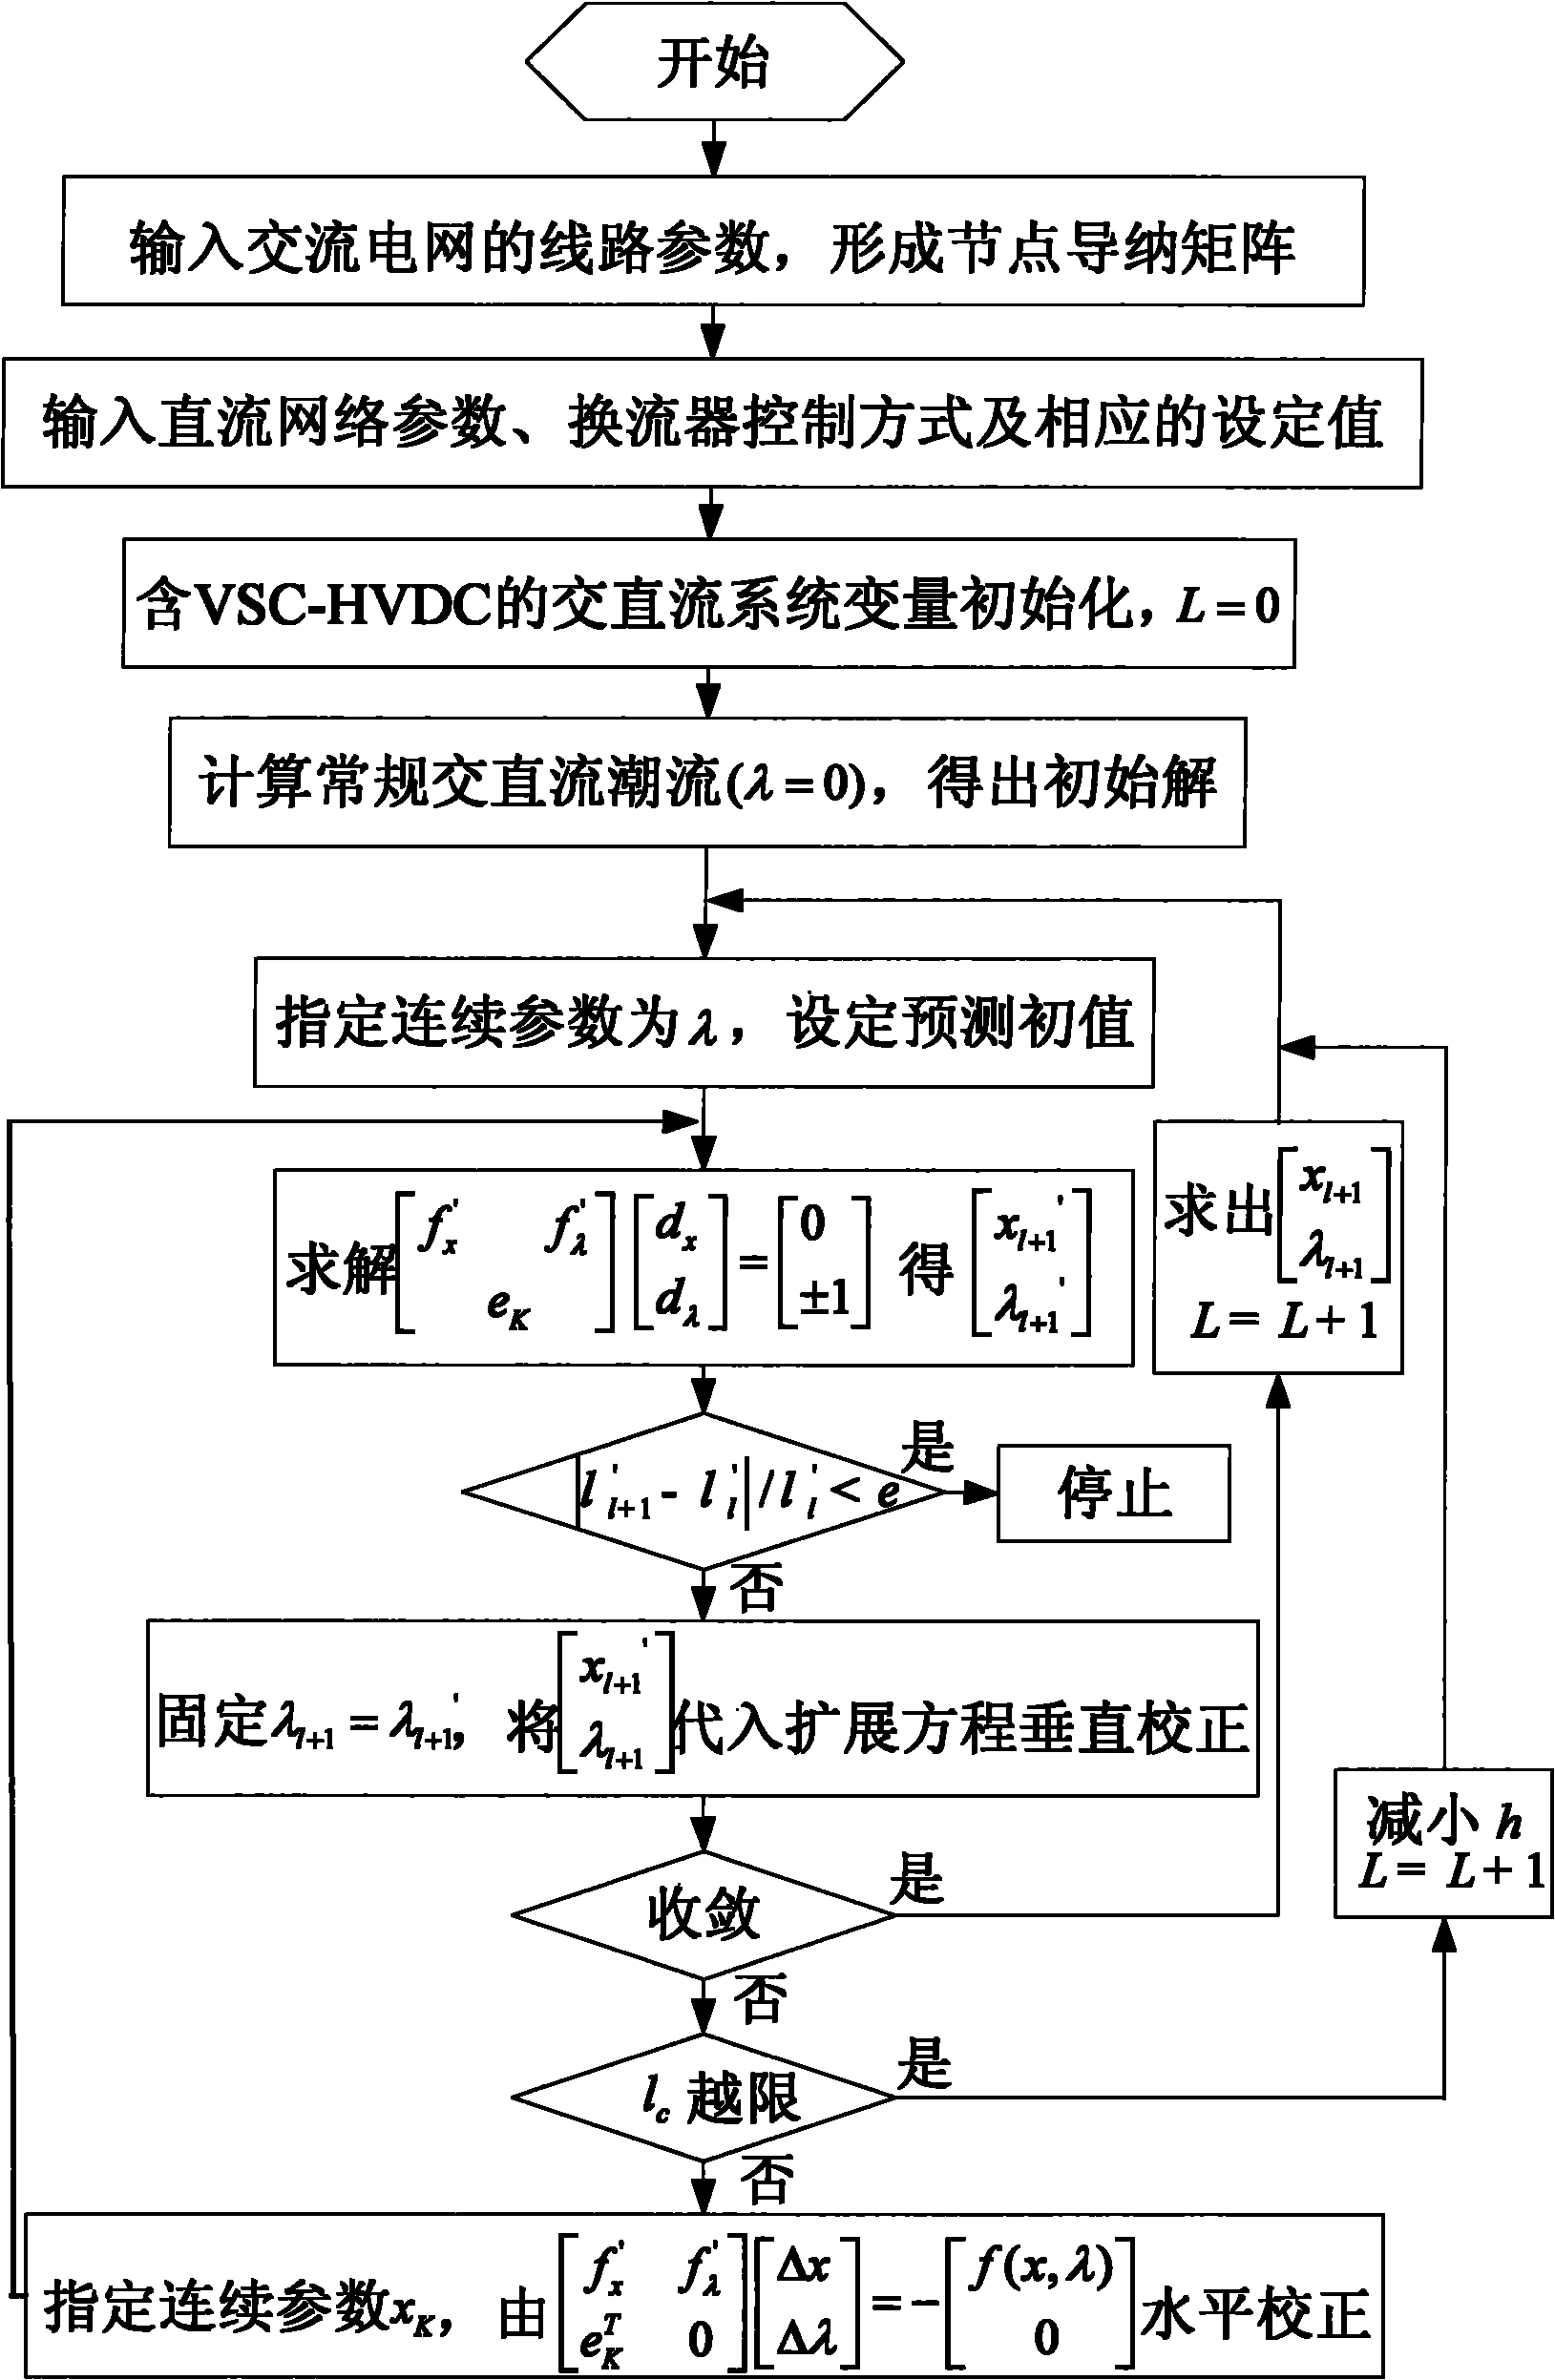 Method for statically analyzing voltage stabilization of VSC-HVDC (Voltage-Sourced Converter-High Voltage Director Current) containing AC and DC system